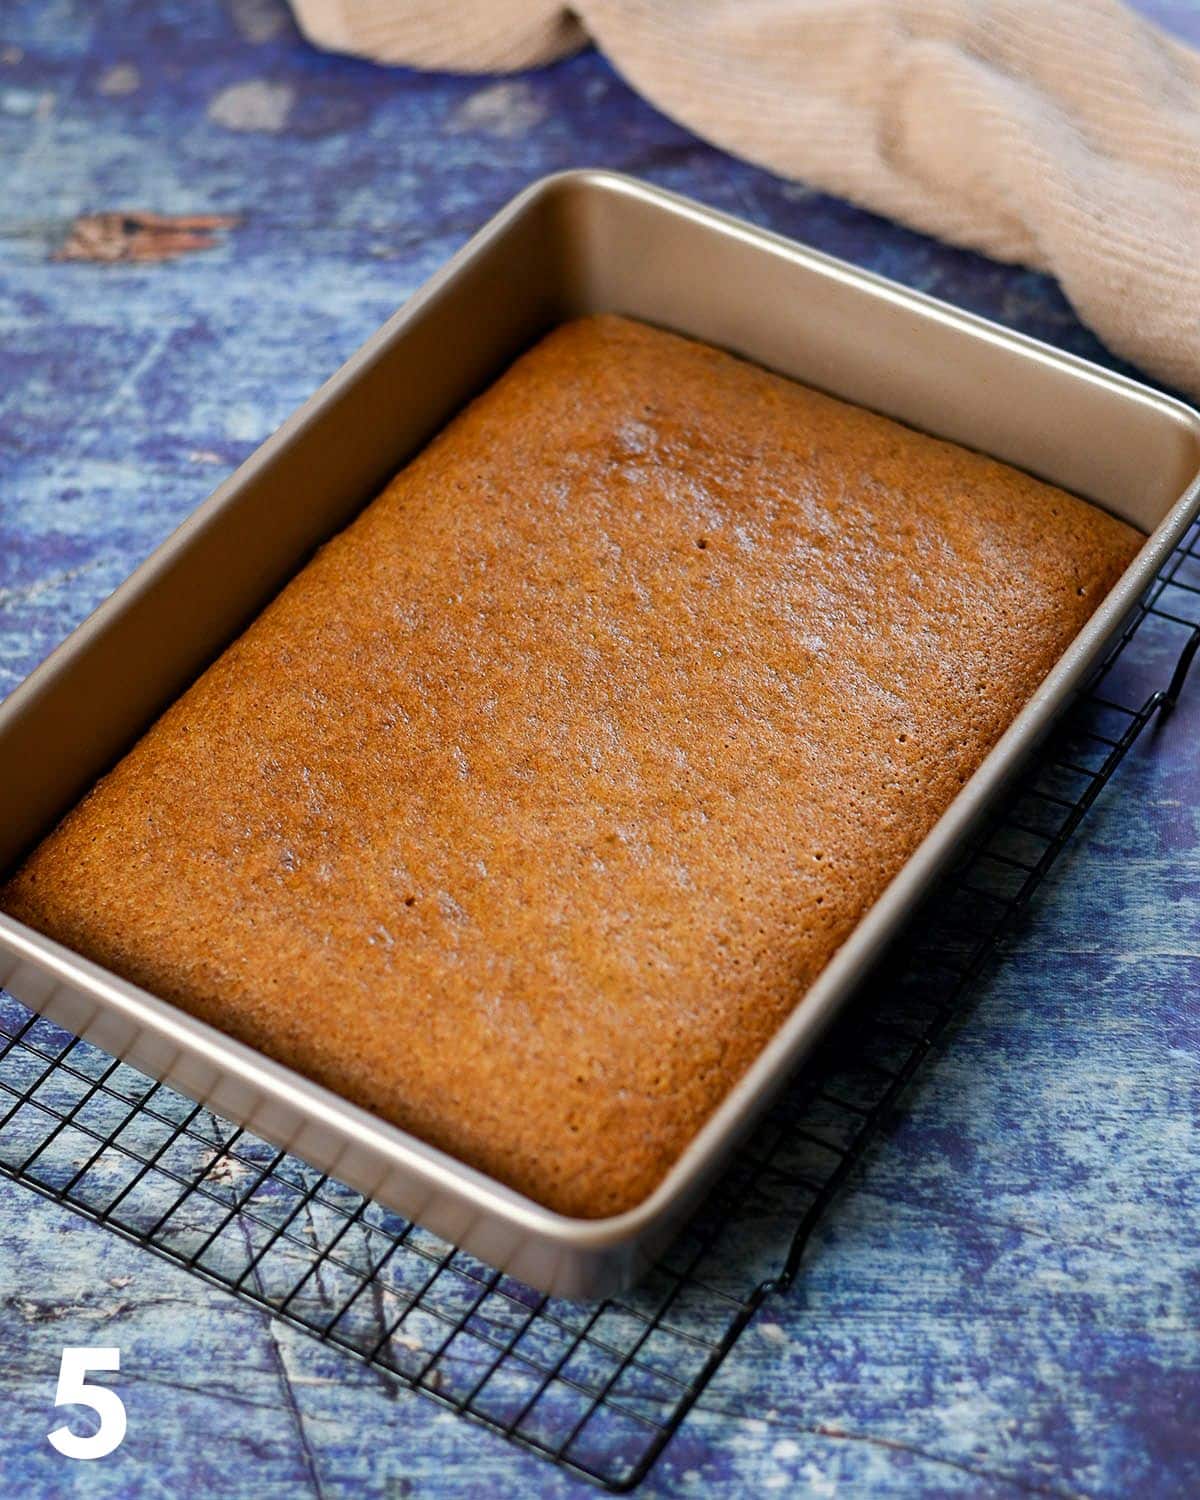 Just baked applesauce cake in a metal oblong pan.